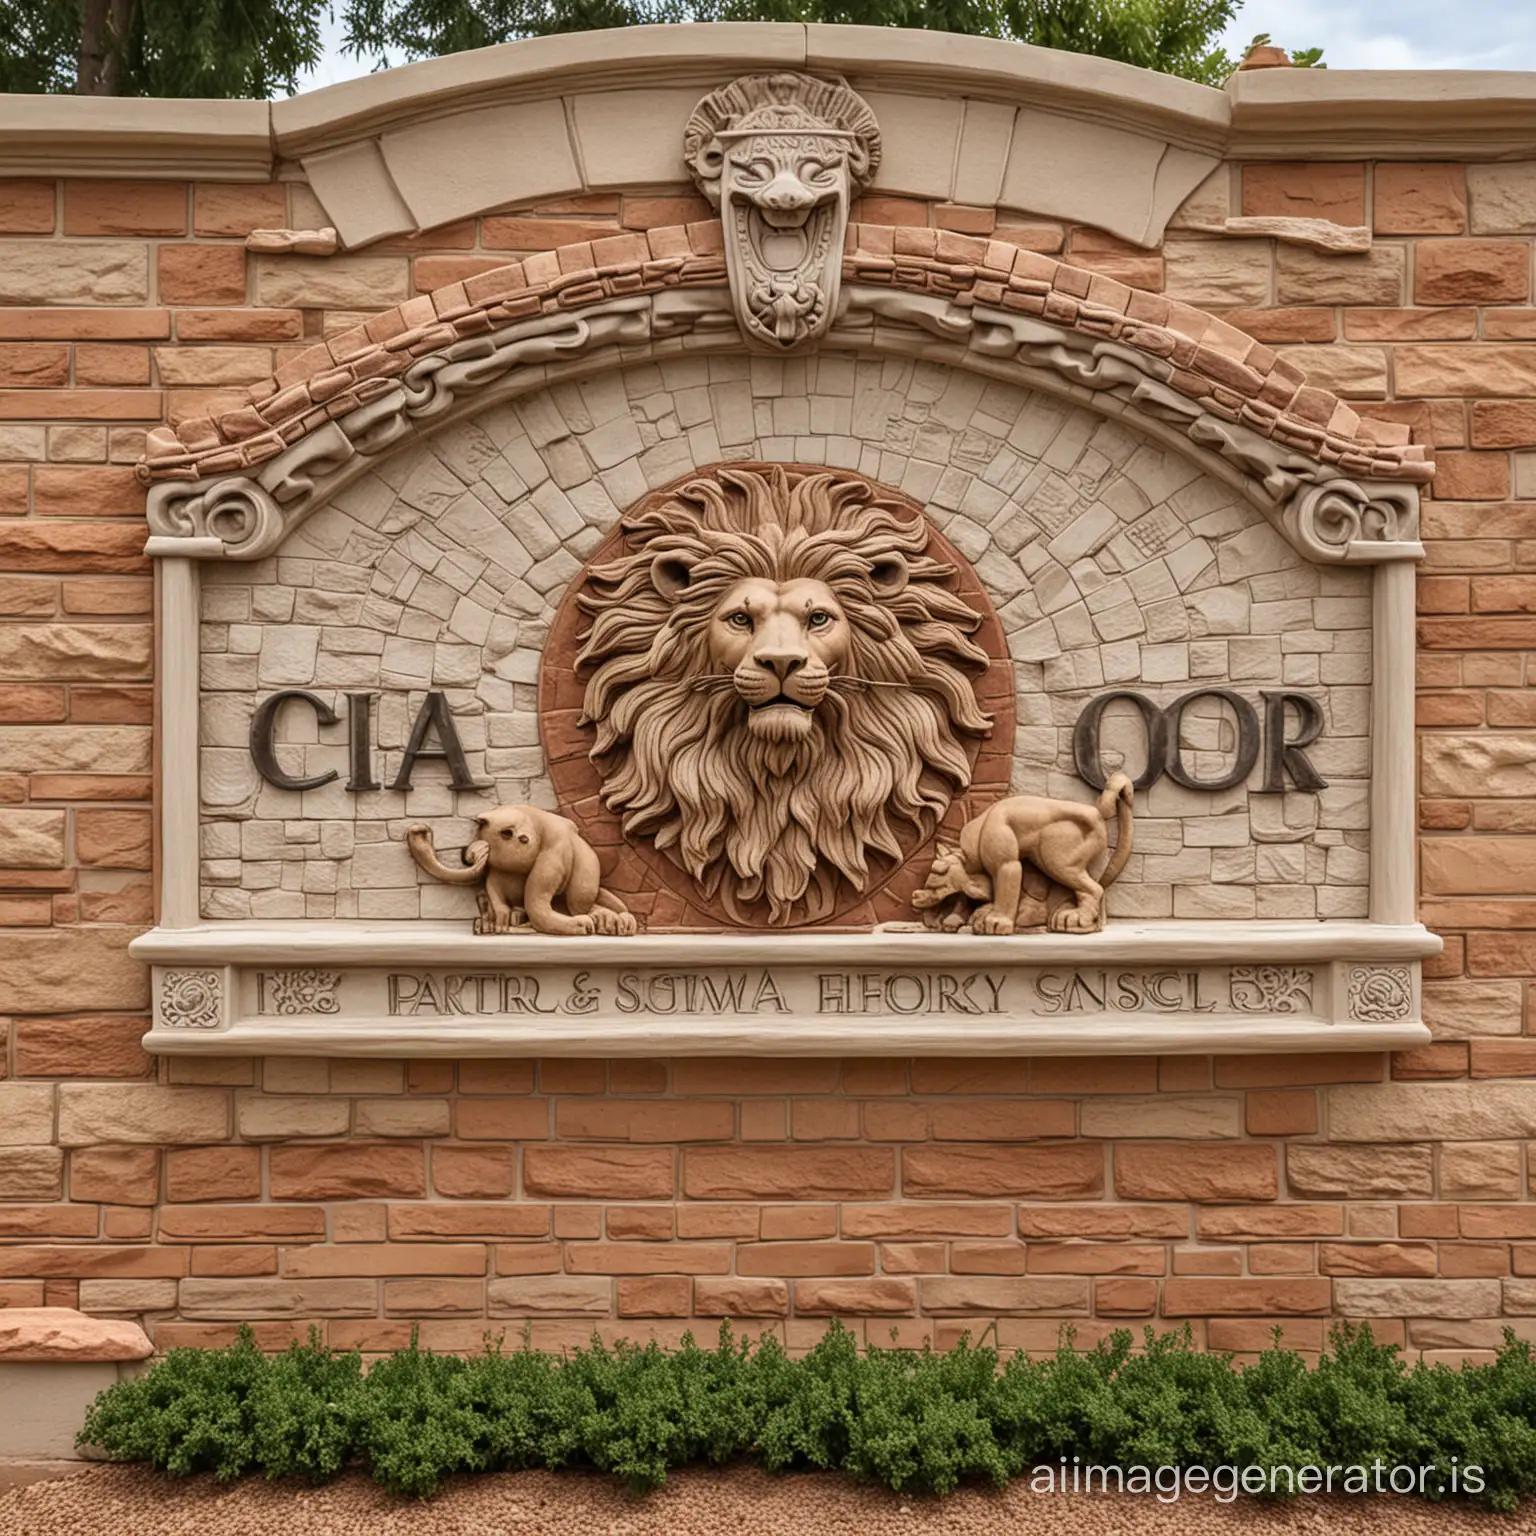 Mediterranean-Styled-Brick-and-Stucco-Neighborhood-Monument-with-Lion-Motifs-and-Elements-of-Water-and-Sun